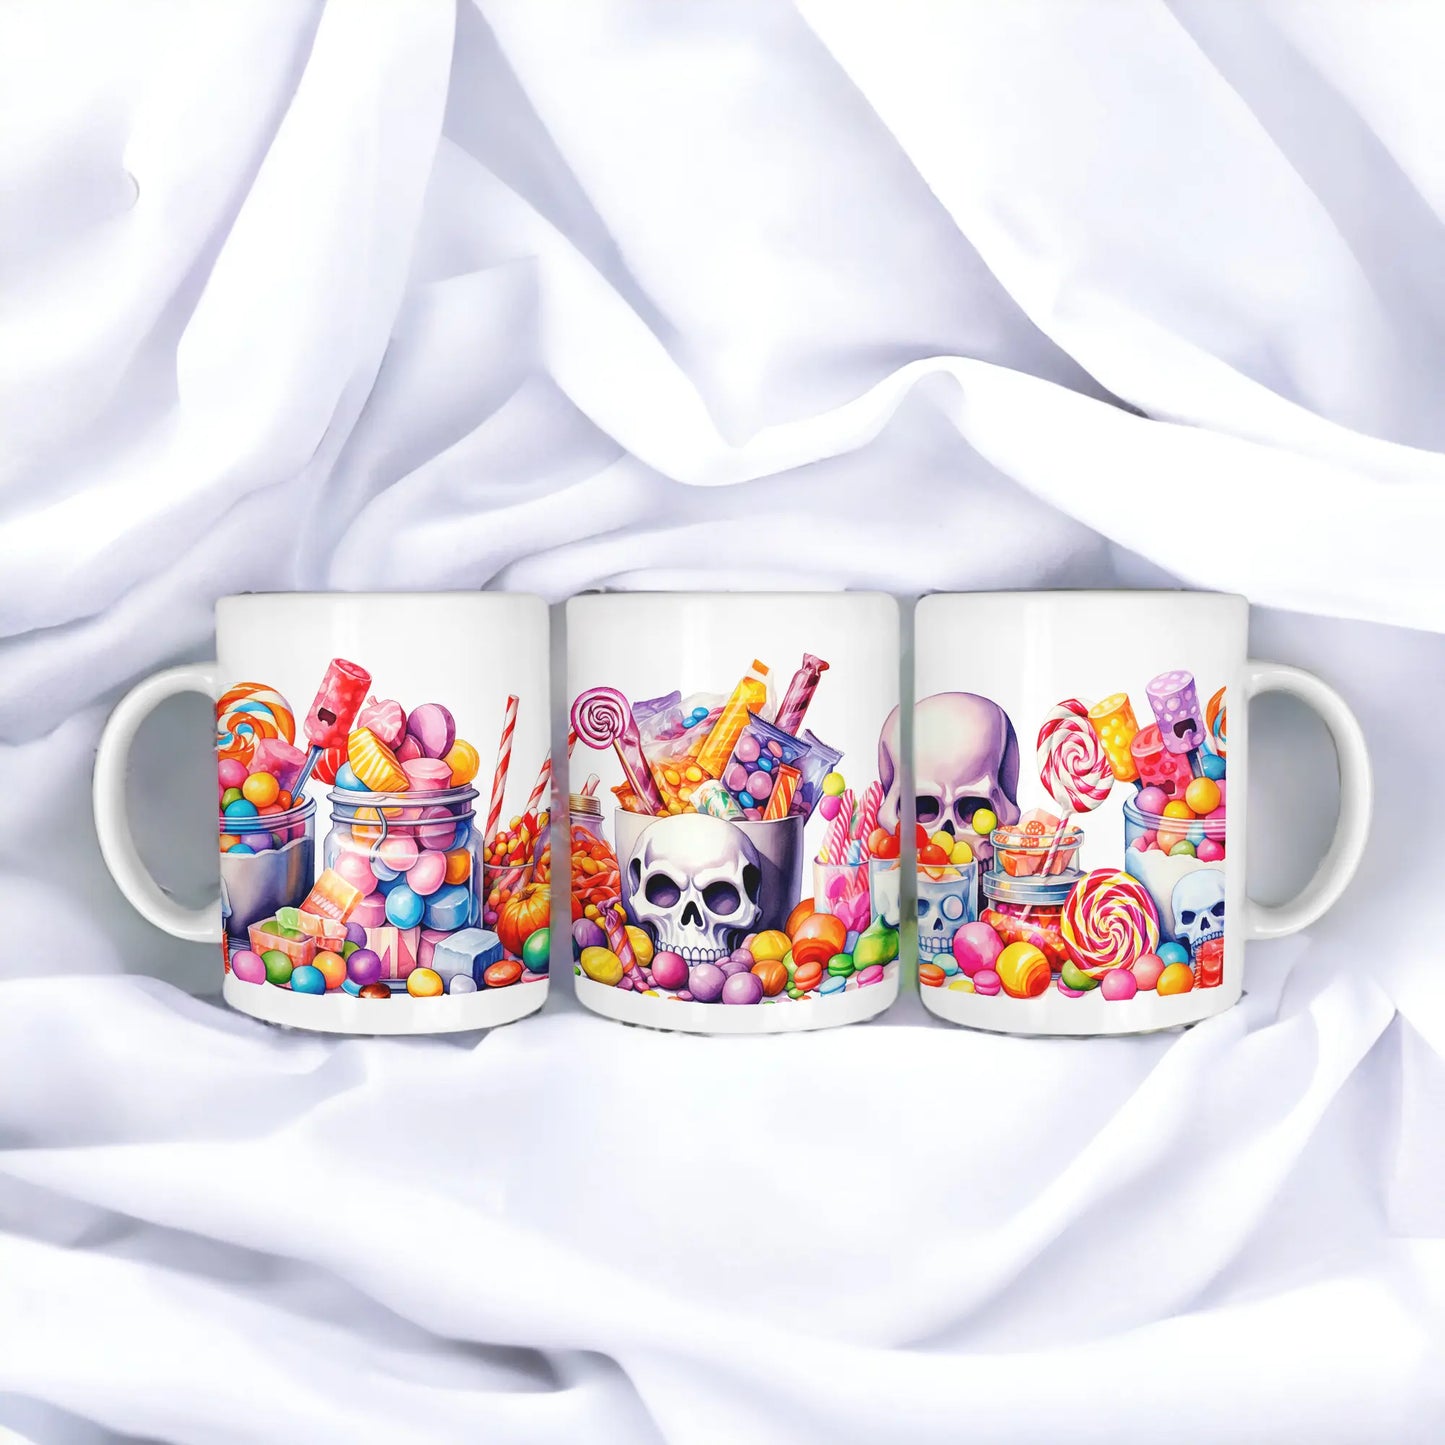  Halloween Candy Delight - Colourful Skull Sweets 11oz/15oz Mug - Perfect Halloween Gift with Free Shipping by Free Spirit Accessories sold by Free Spirit Accessories